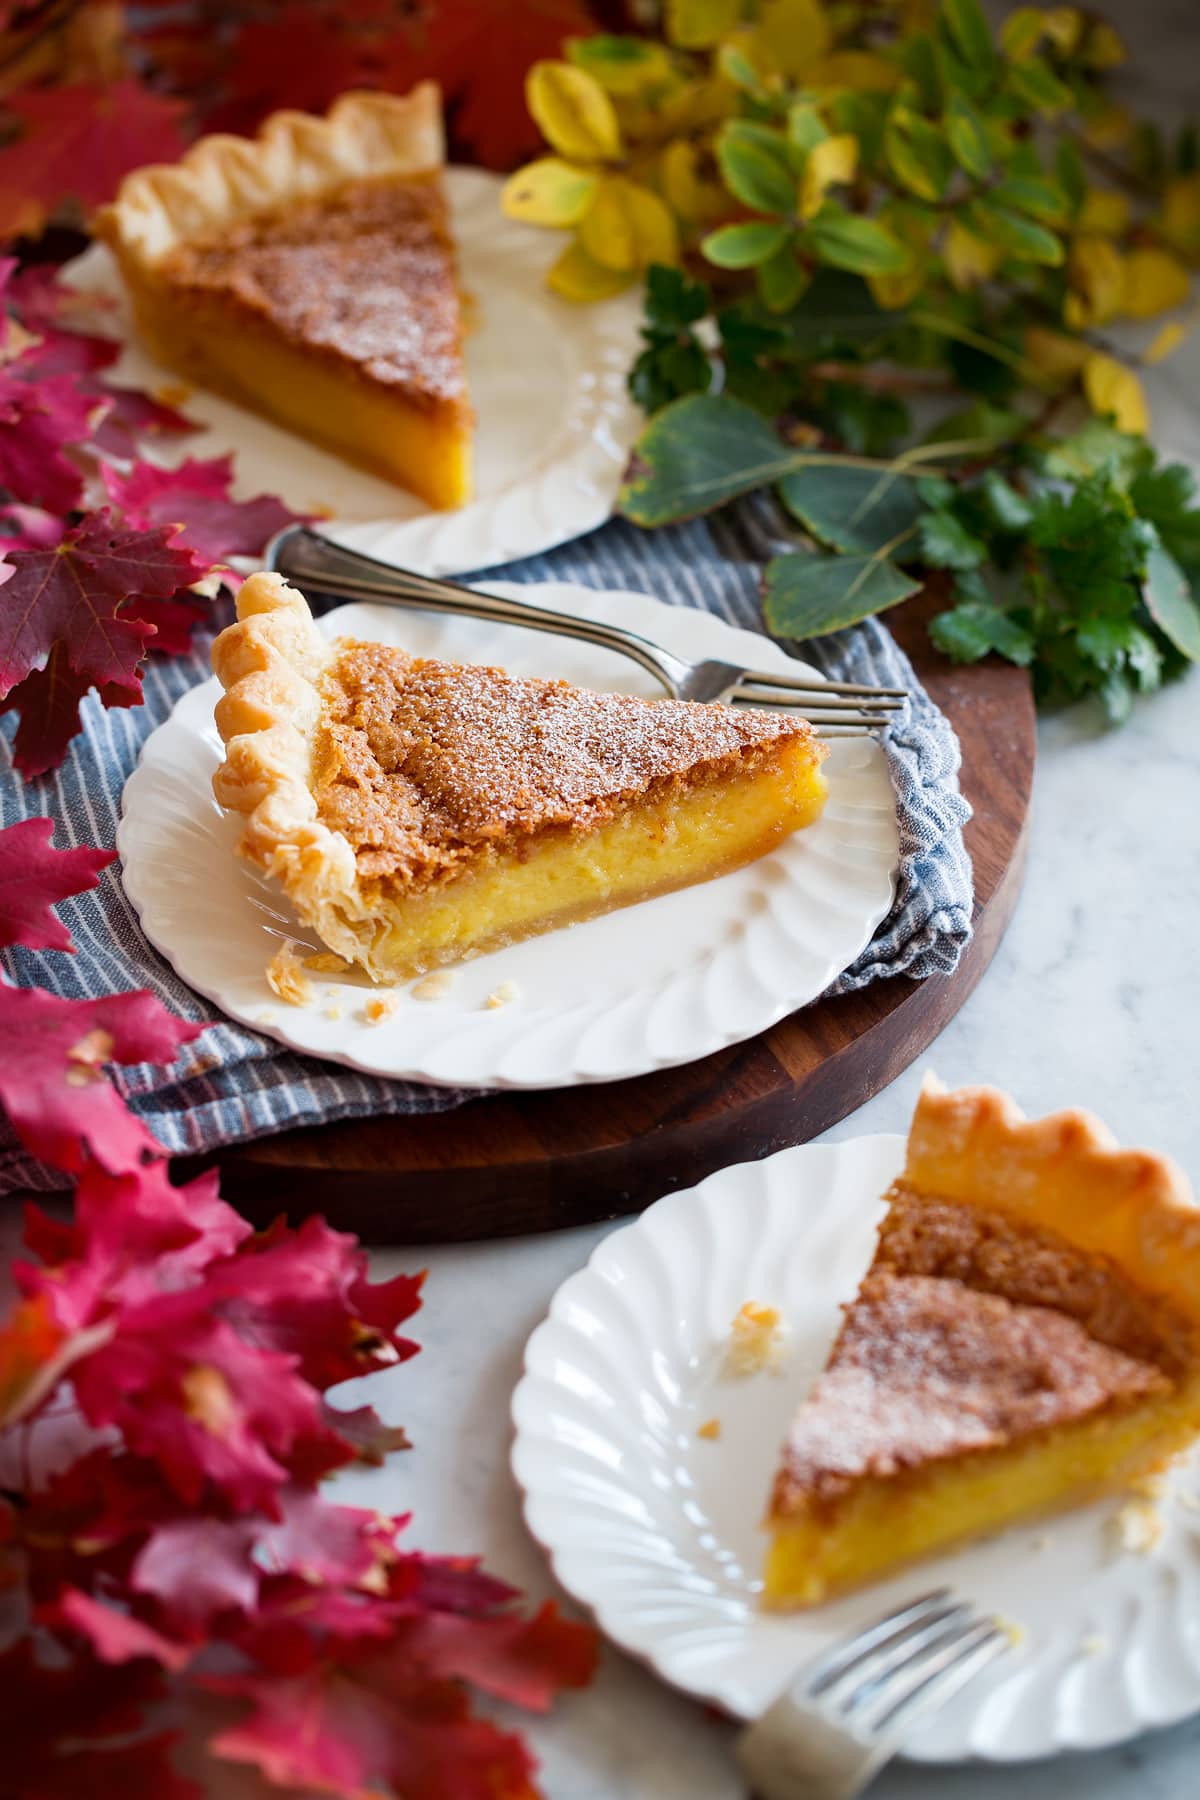 Three slices of chess pie shown on white dessert plates with vibrantly colored fall leaves surrounding.